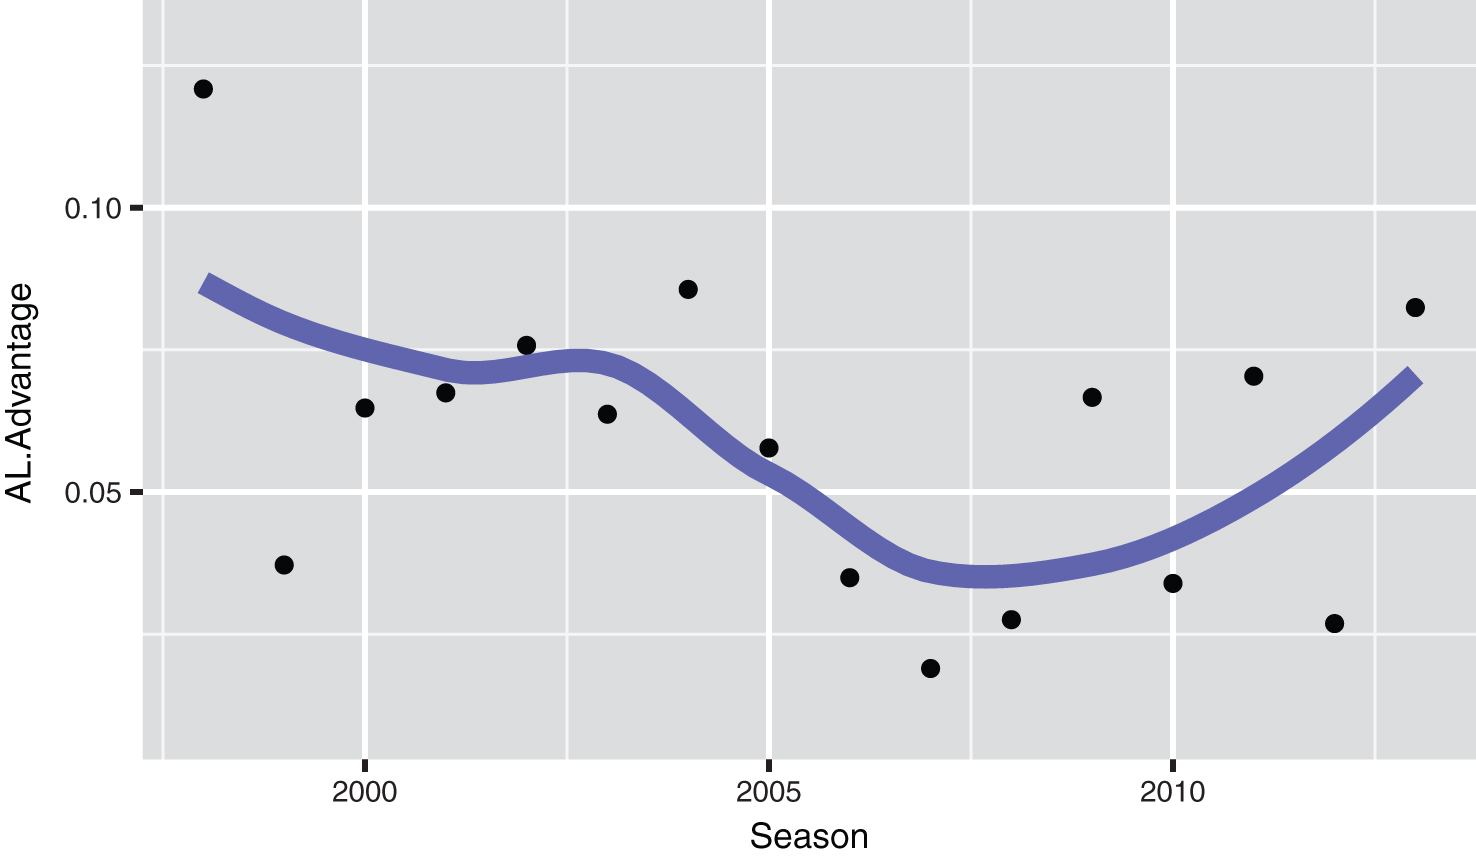 American League run-scoring advantage over the National League for the seasons  1998 to 2013, the advantage is the estimate of the parameter β in the fit of the ordinal regression model. A smoothing curve indicates that the American League advantage in scoring runs has remained pretty constant over this time interval.